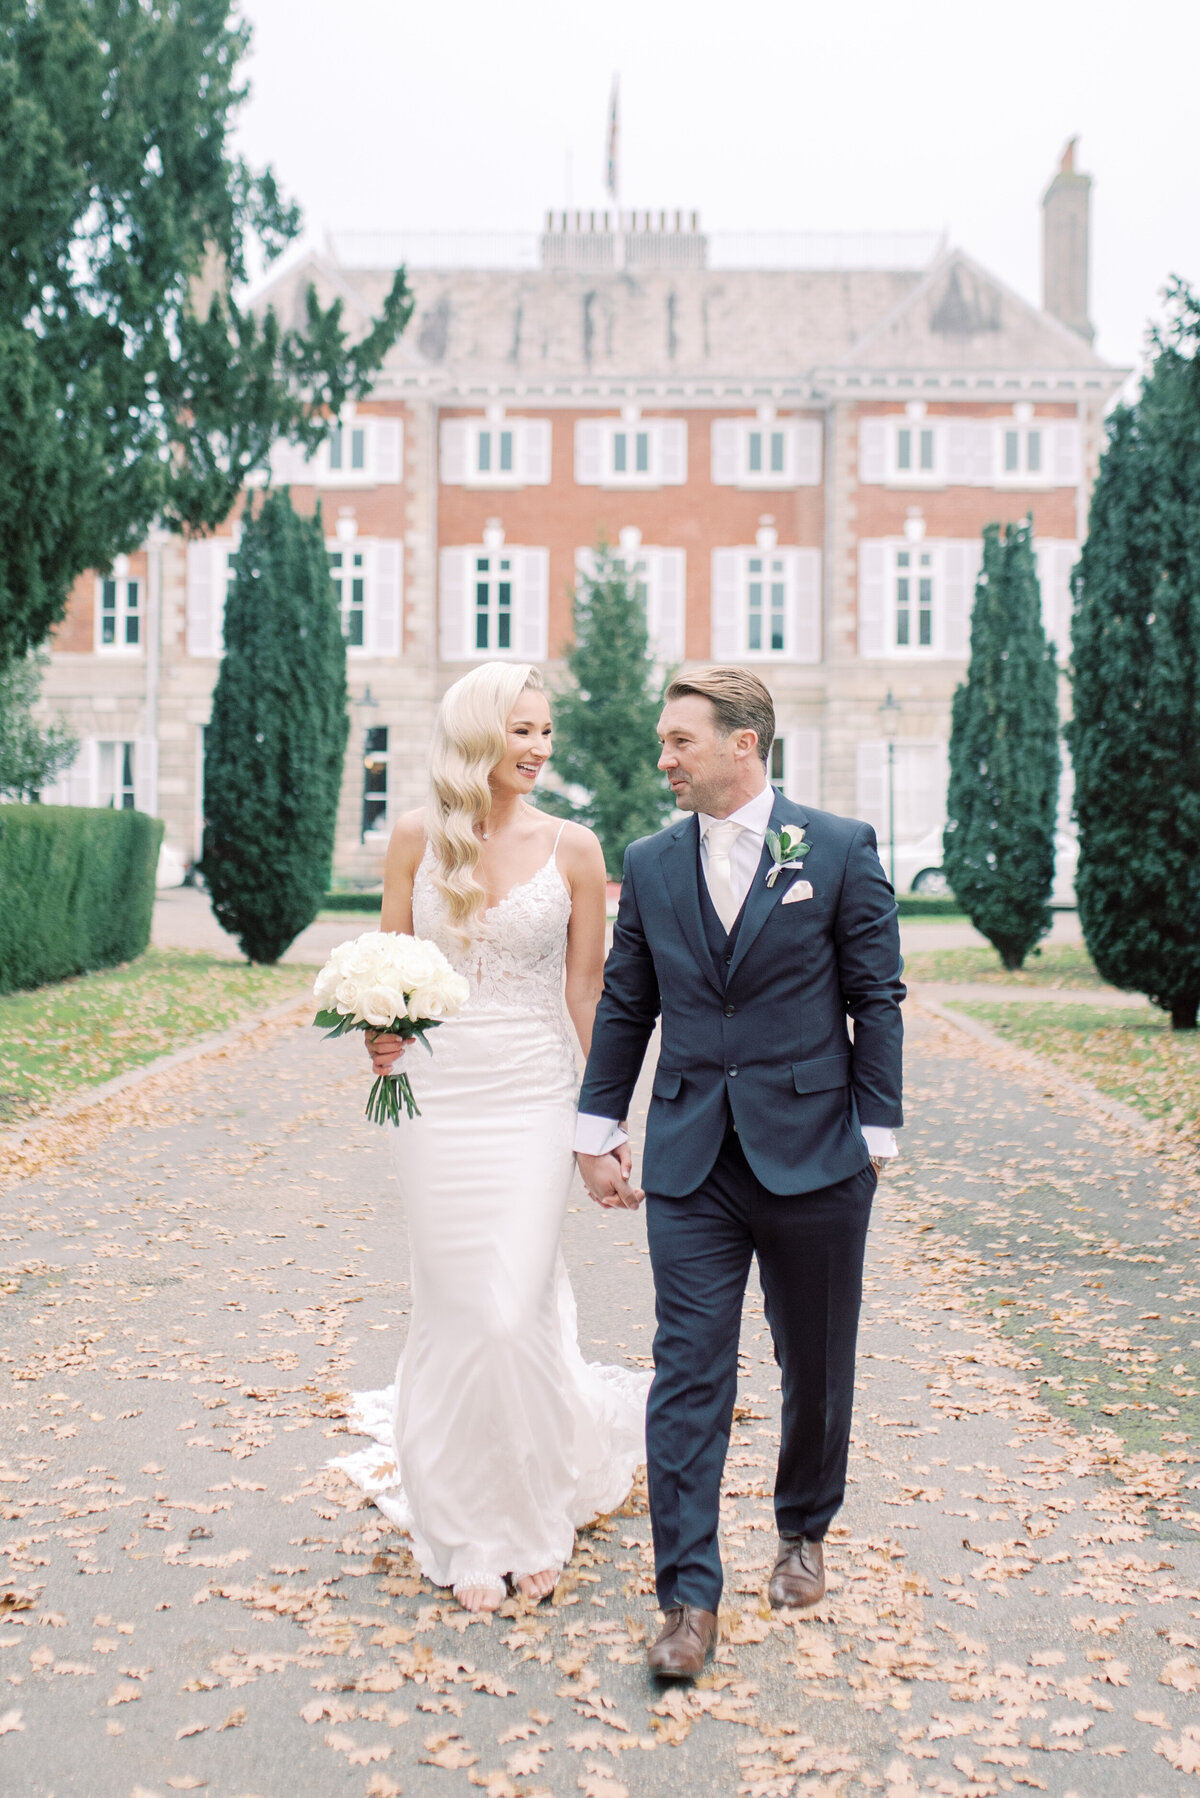 Light and airy style image bride and groom walking toward sthe camera holding hands, looking at each other and smiling. The bride is wearing a fitted dress with lace detailing and the groom is in a dark blue suit